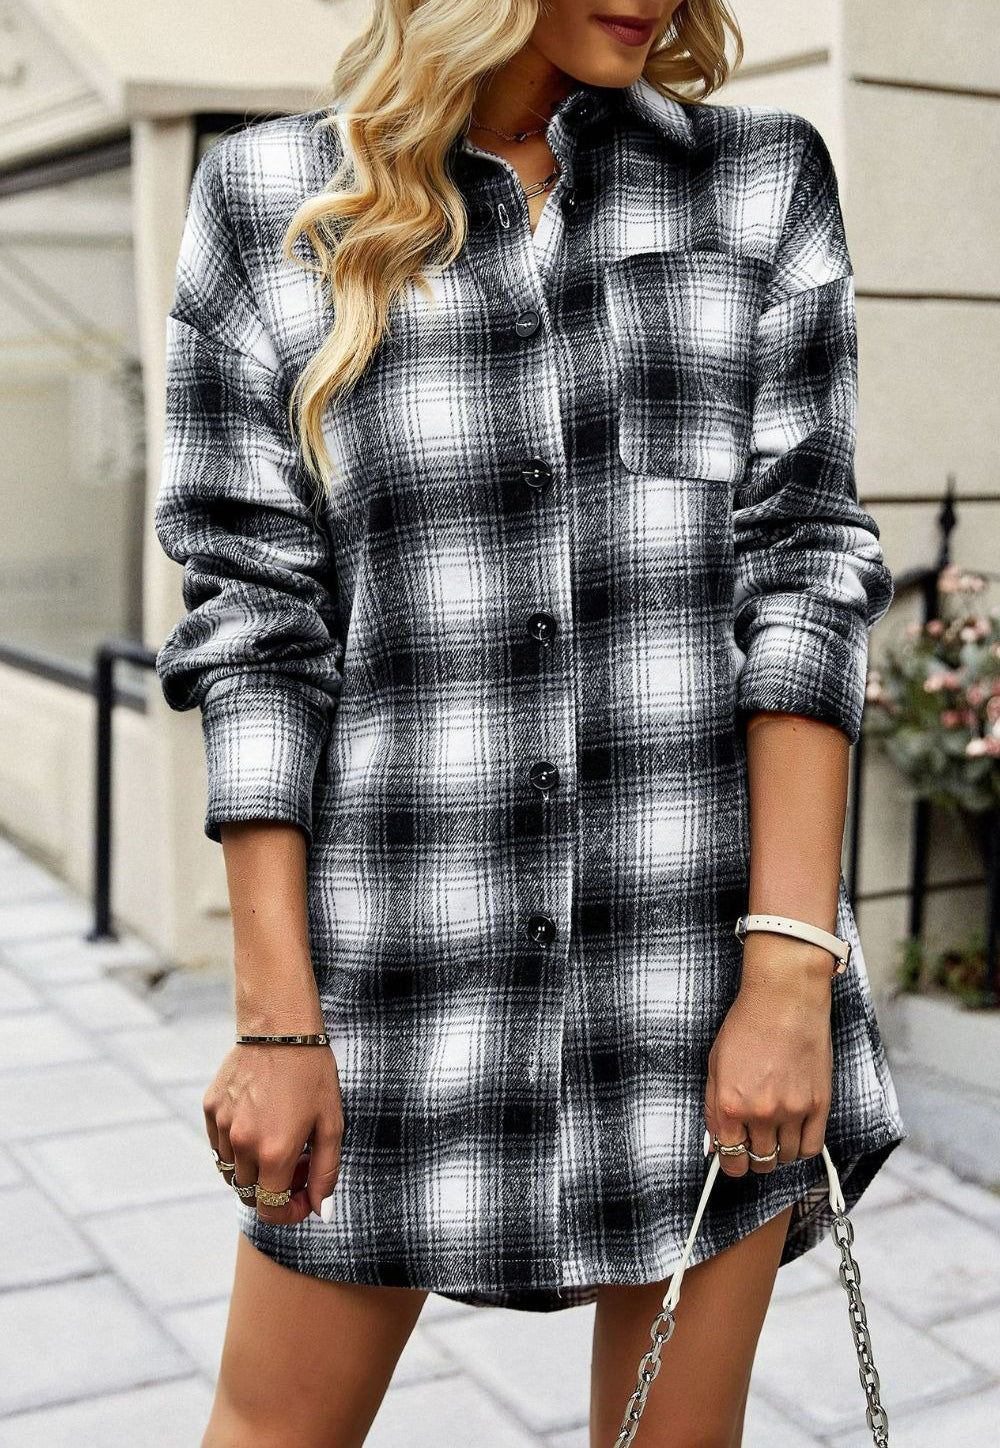 Baggy Long Sleeve Check Outerwear